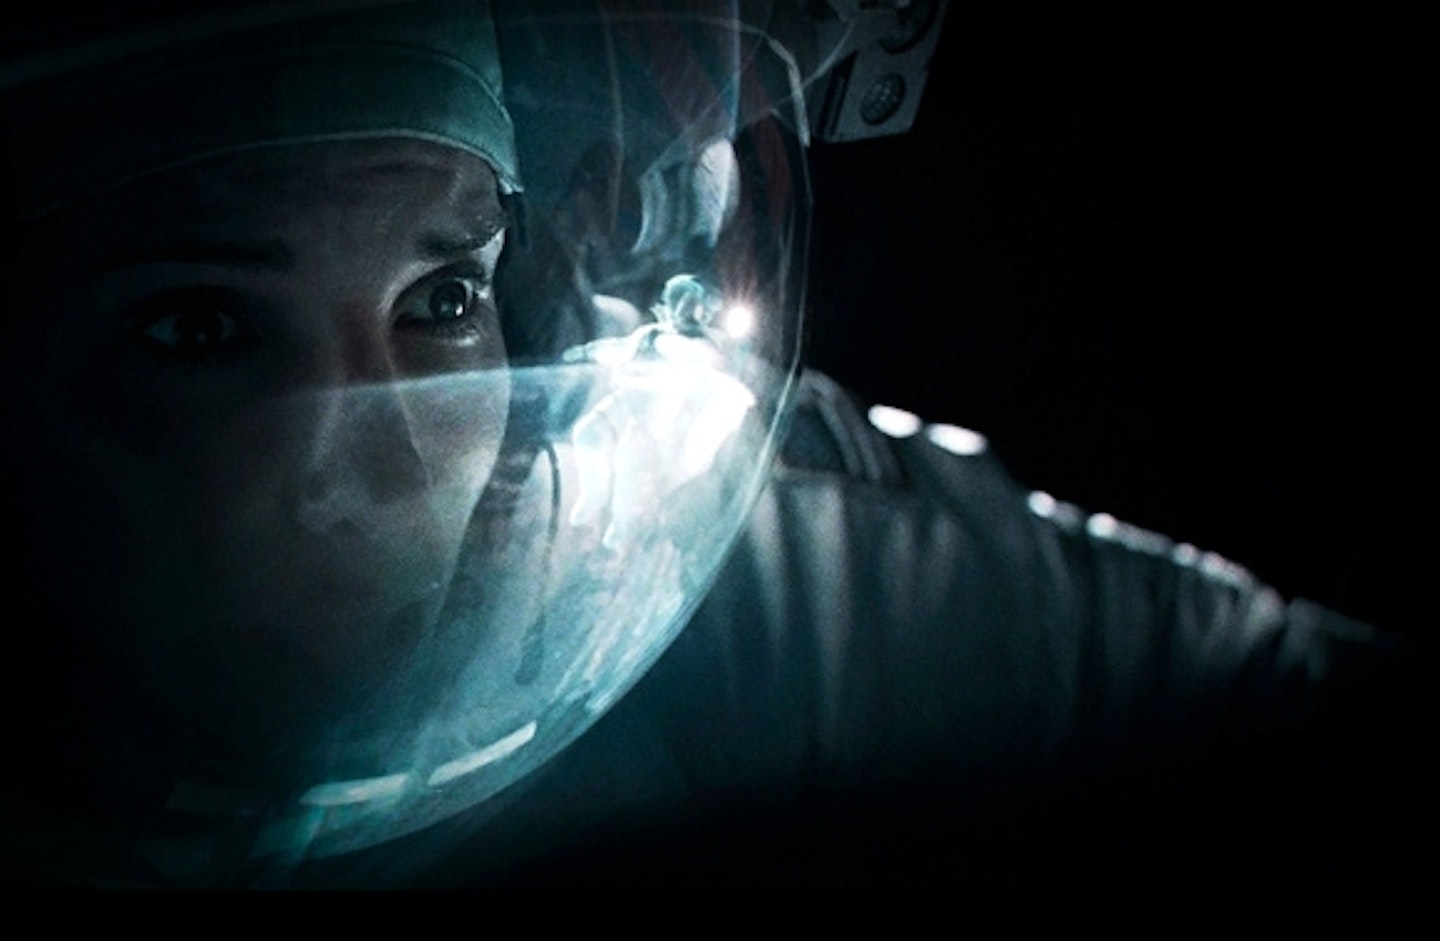 Gravity Character Poster Arrives